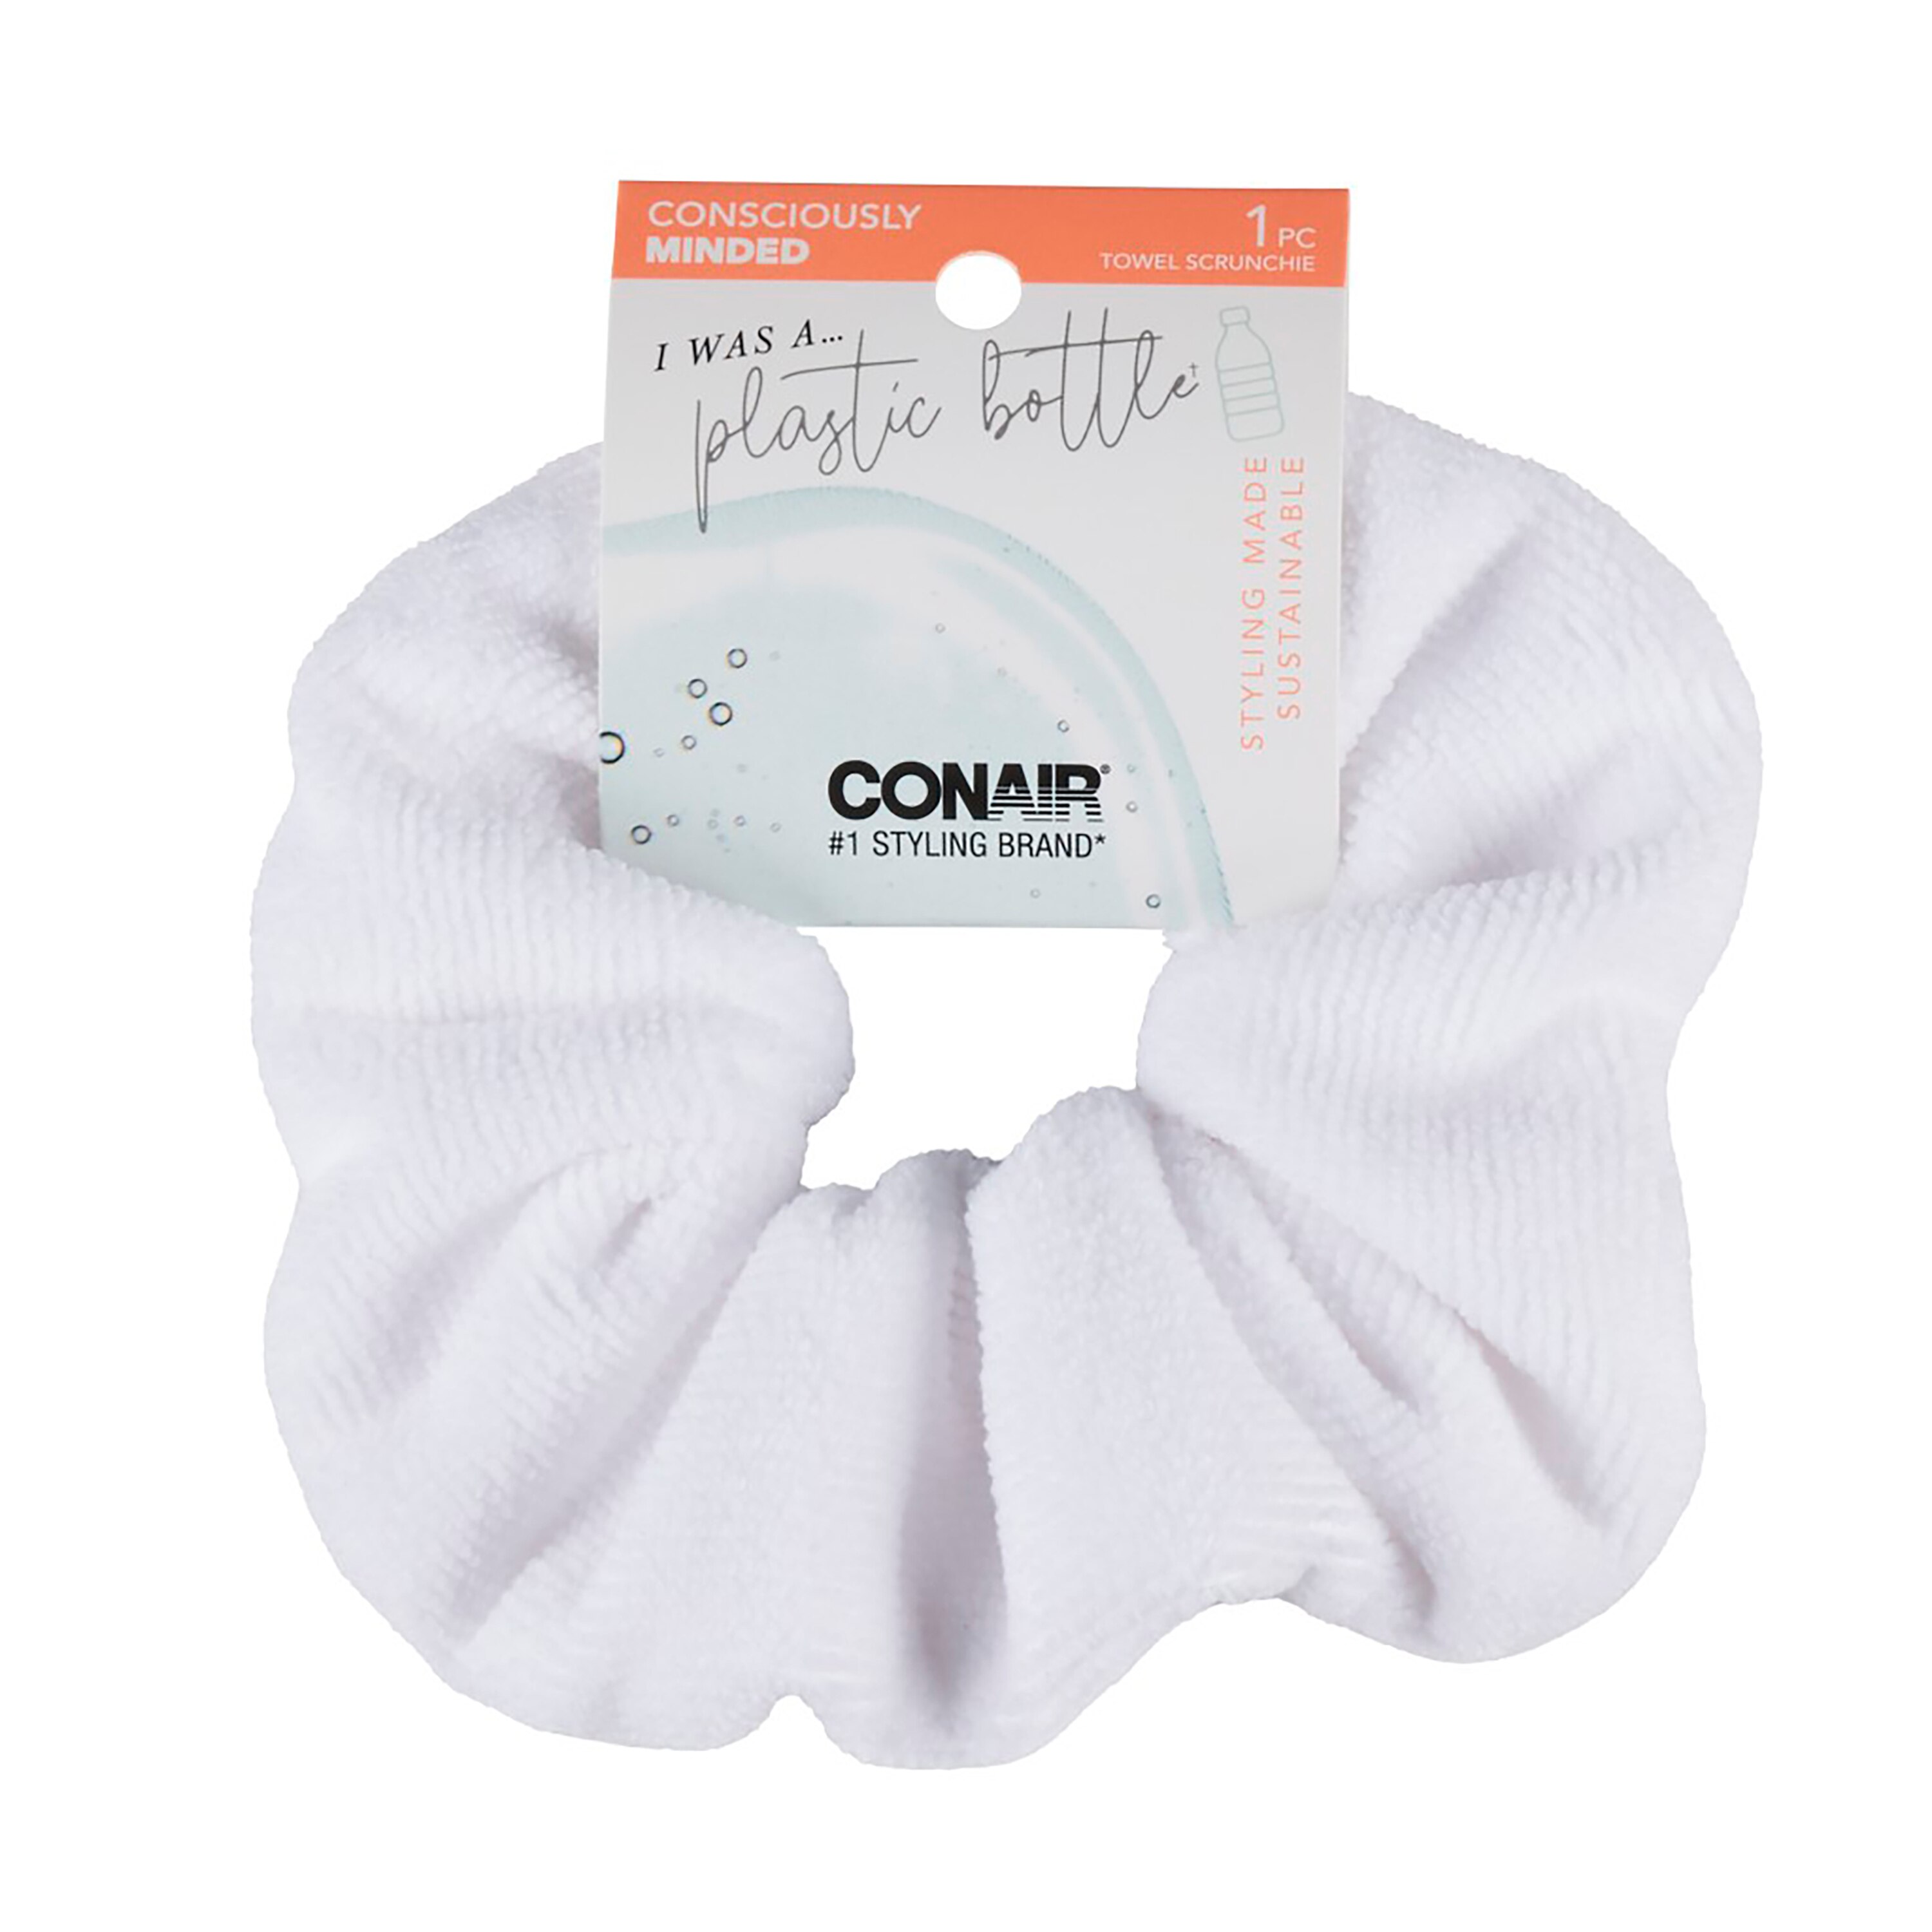 Conair Consciously Minded Towel Scrunchie 1pk